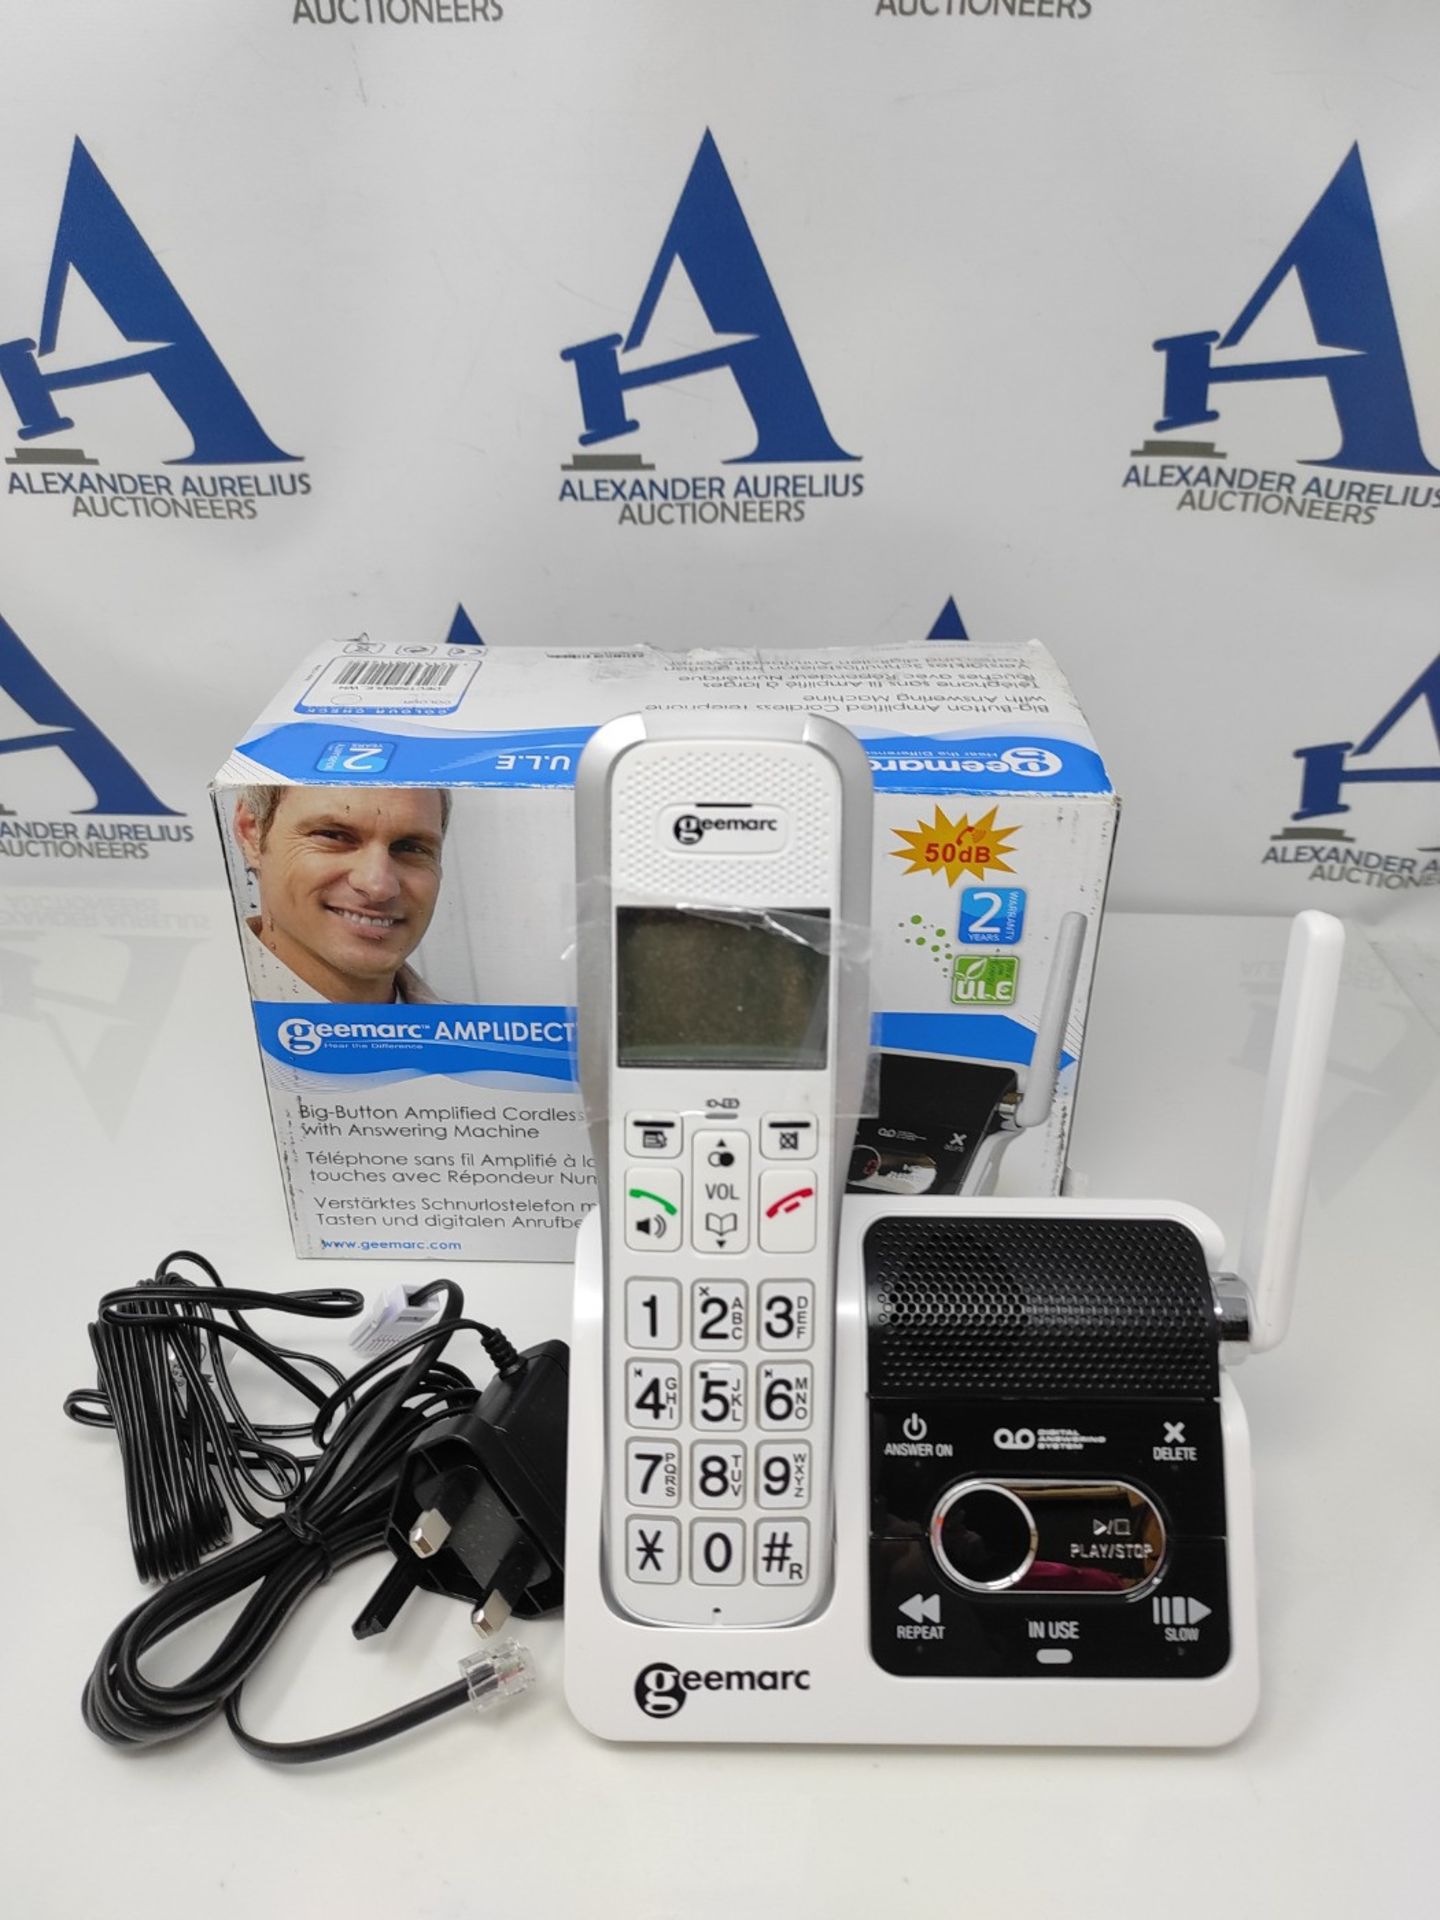 RRP £95.00 Geemarc Amplidect 595 U.L.E - Loud Cordless Home Telephone with Intercom System, Answe - Image 2 of 2